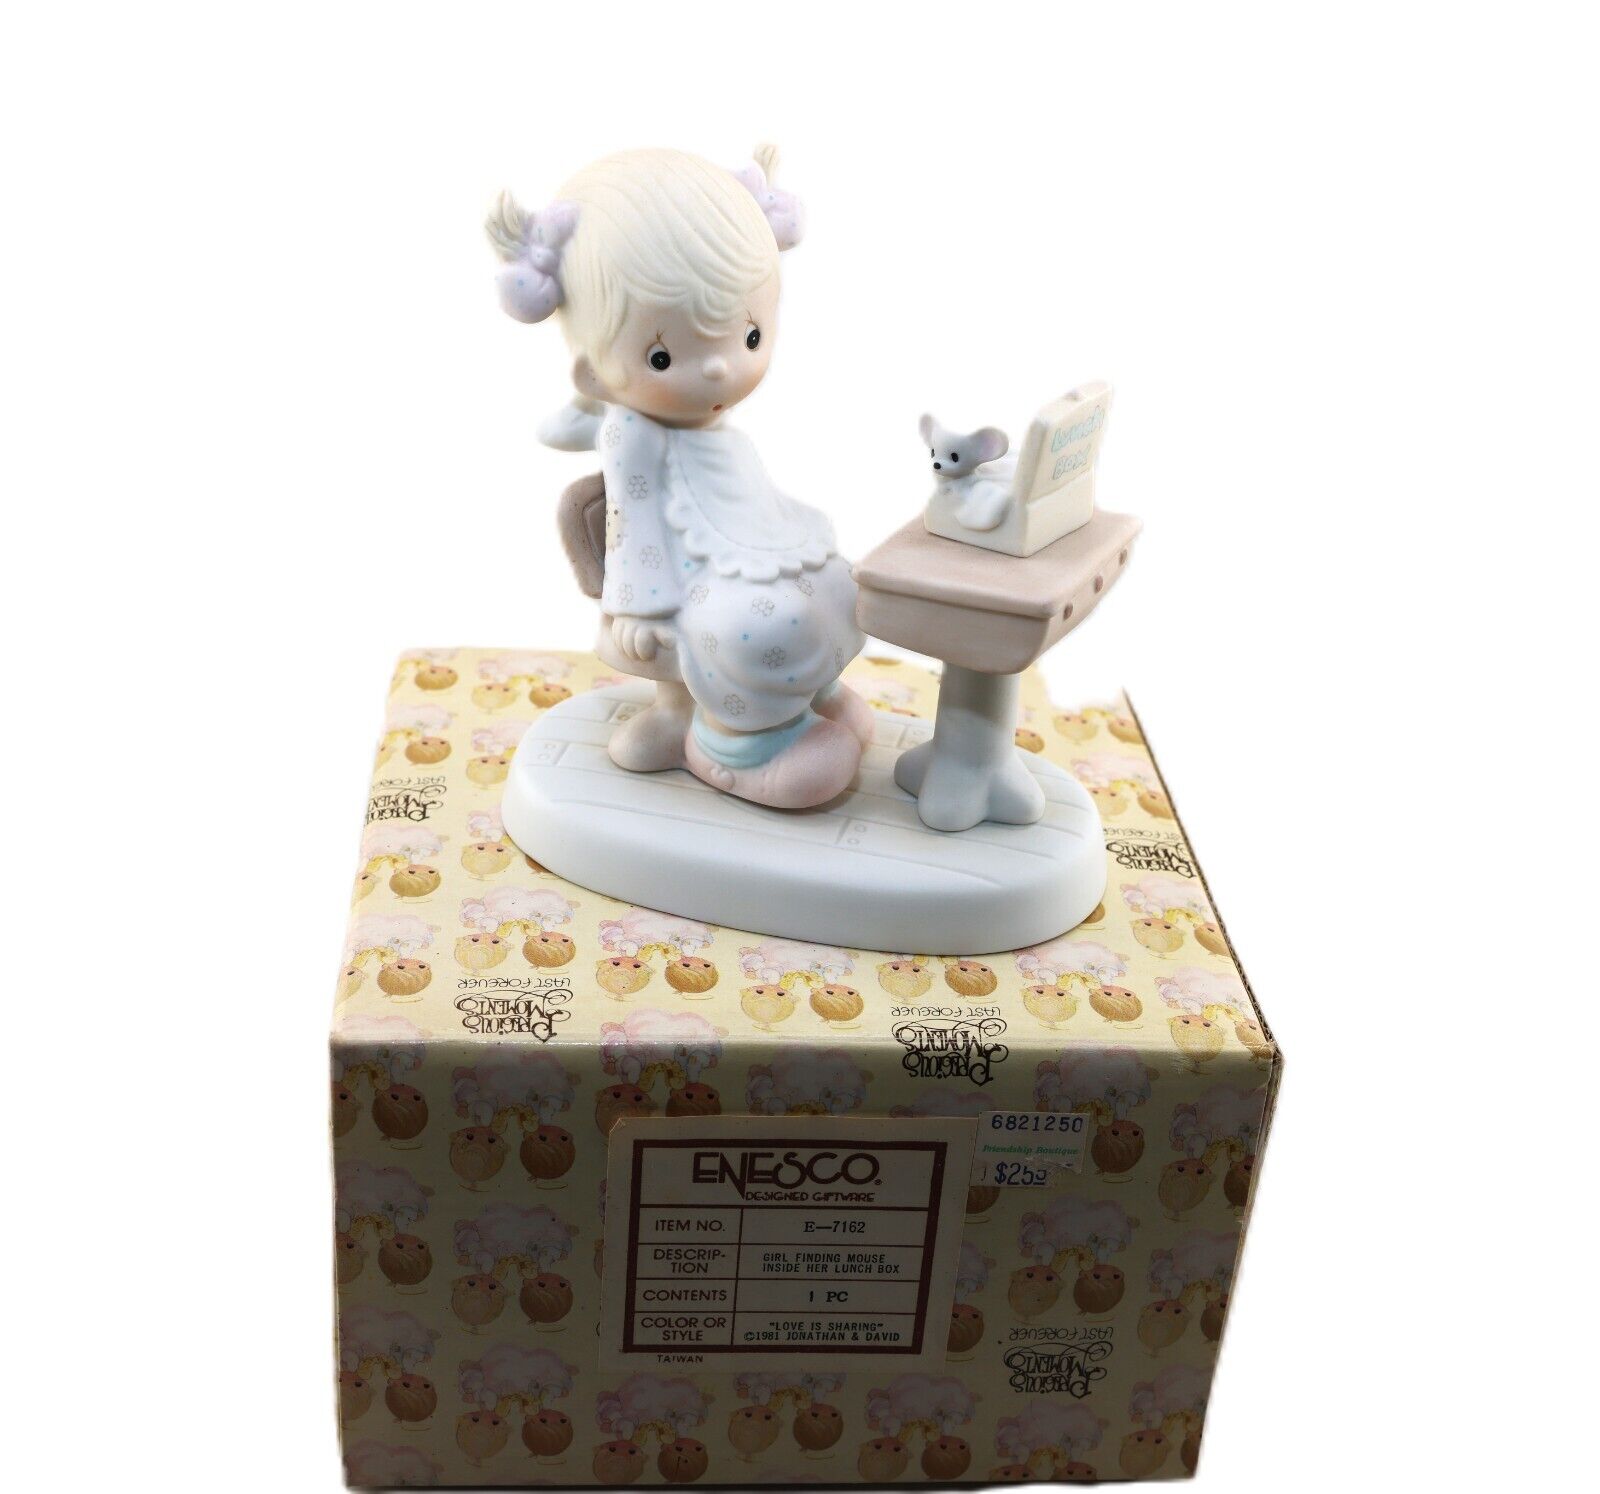 1981 Precious Moments Porcelain Figurine E-7162 - Love is For Sharing with box